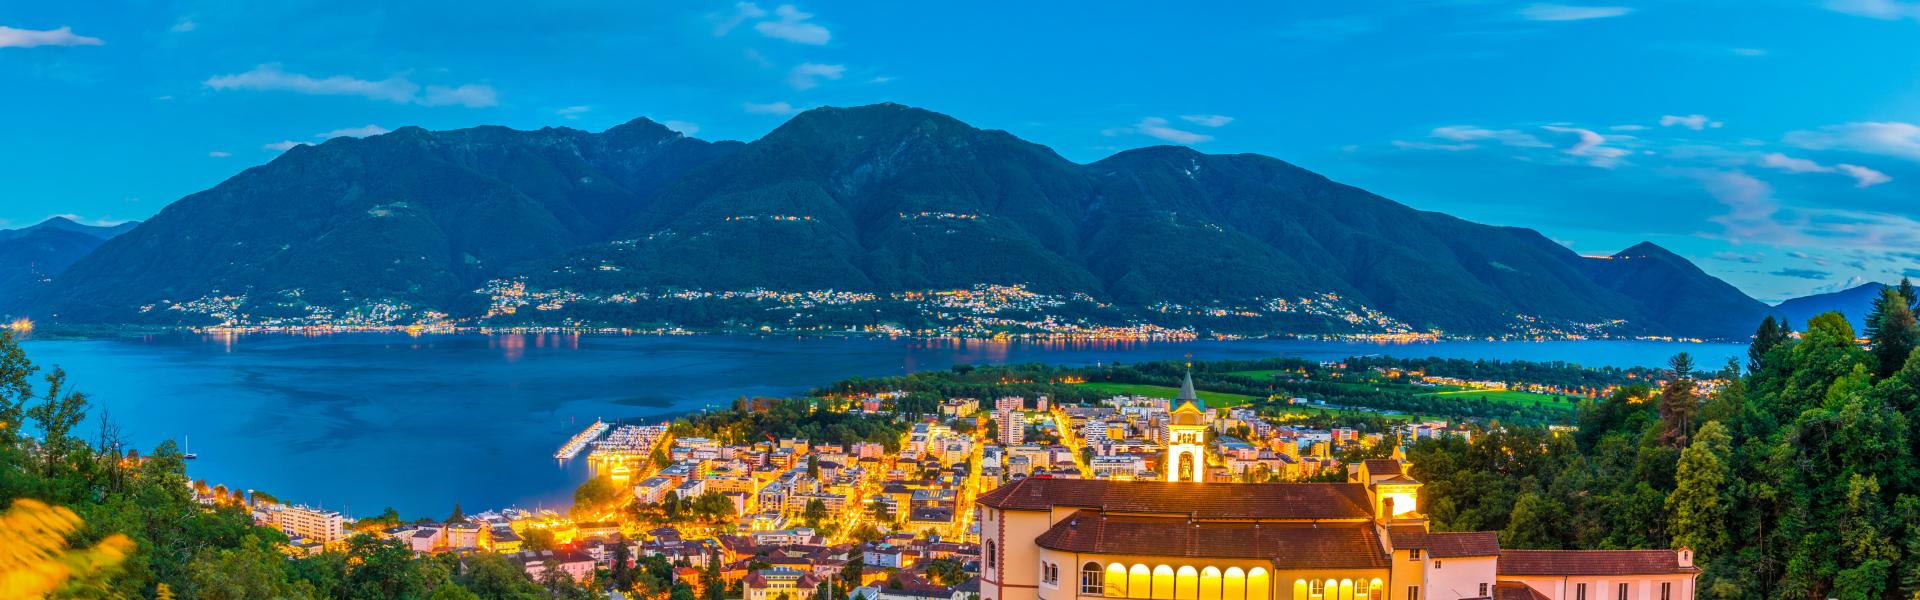 Holiday lettings & accommodation in Locarno - Wimdu